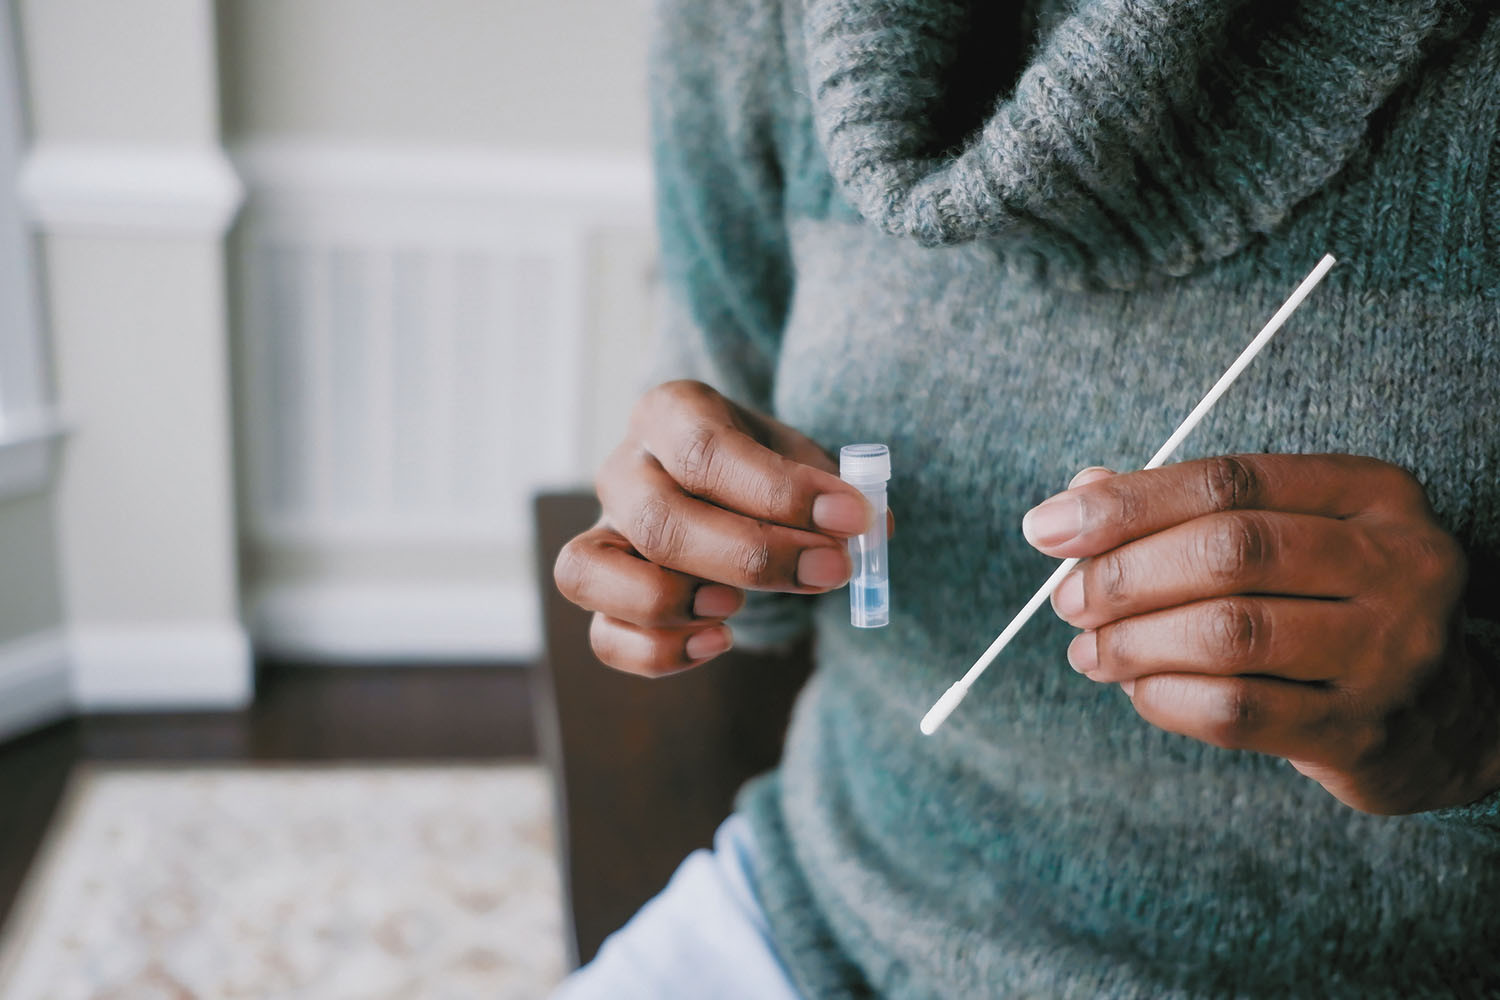 cropped photo of the torso and hands of a woman taking a home test for COVID-19; she is holding a nasal swab in one hand and the collection vial in the other